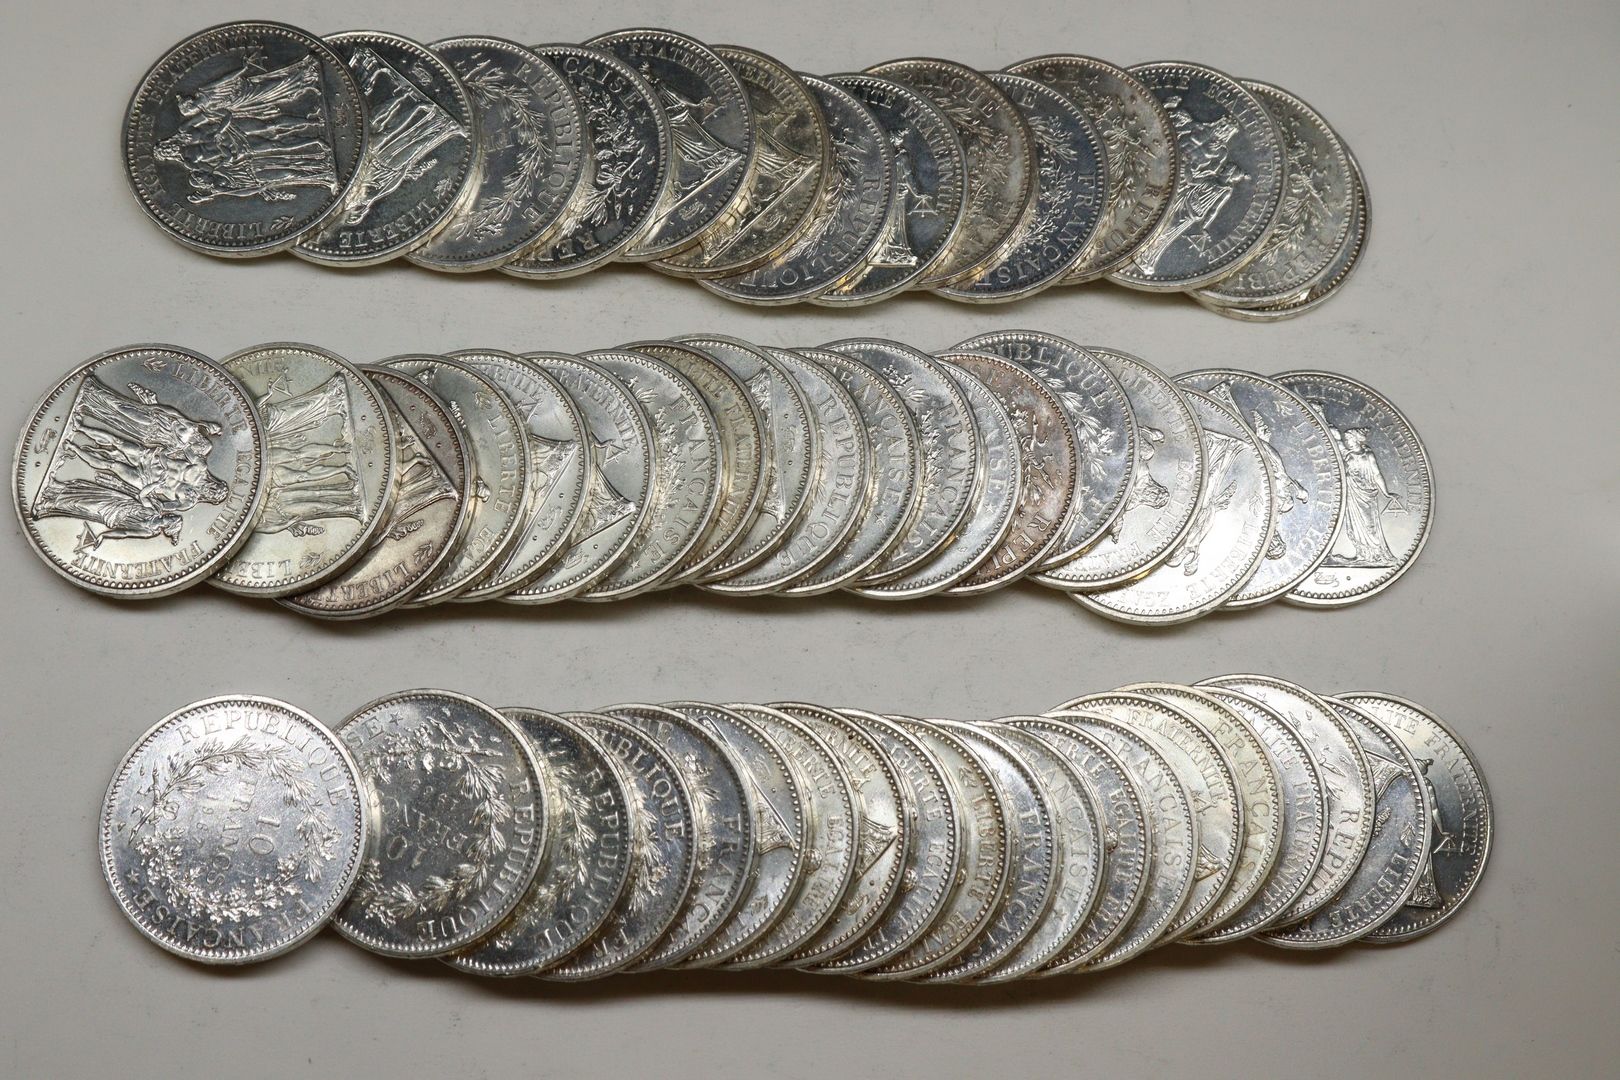 Null Lot of 53 silver 10 Francs coins type Hercules from 1965 to 1970. 舱内空间

重量：&hellip;